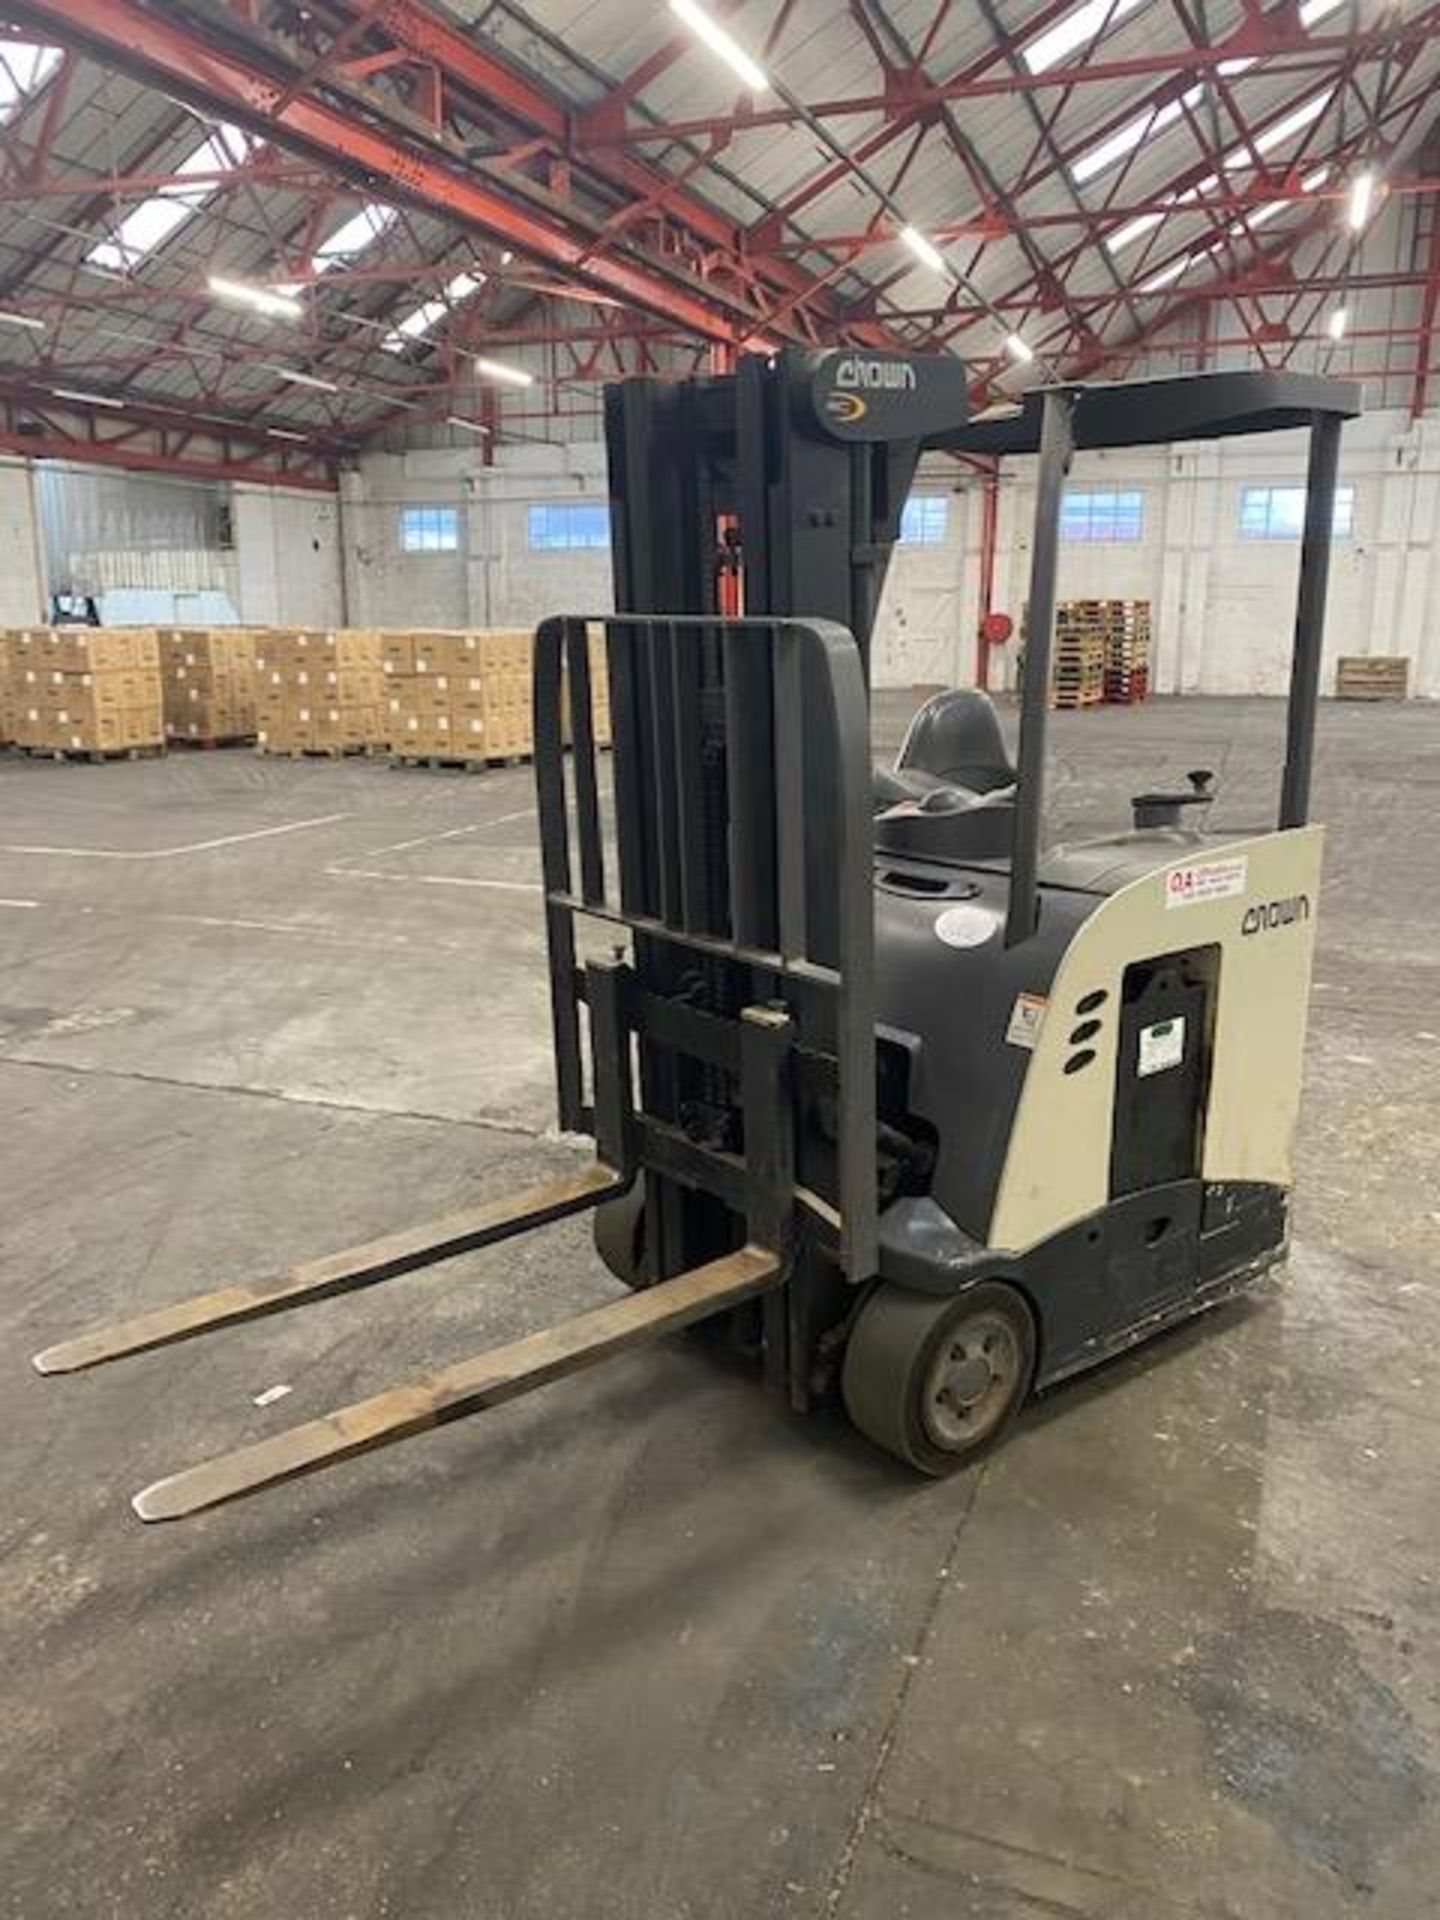 + VAT 2008 Crown Stand In 3 Wheel Forklift - Approx 1570 Hours - 1500Kg Capacity - Will Operate